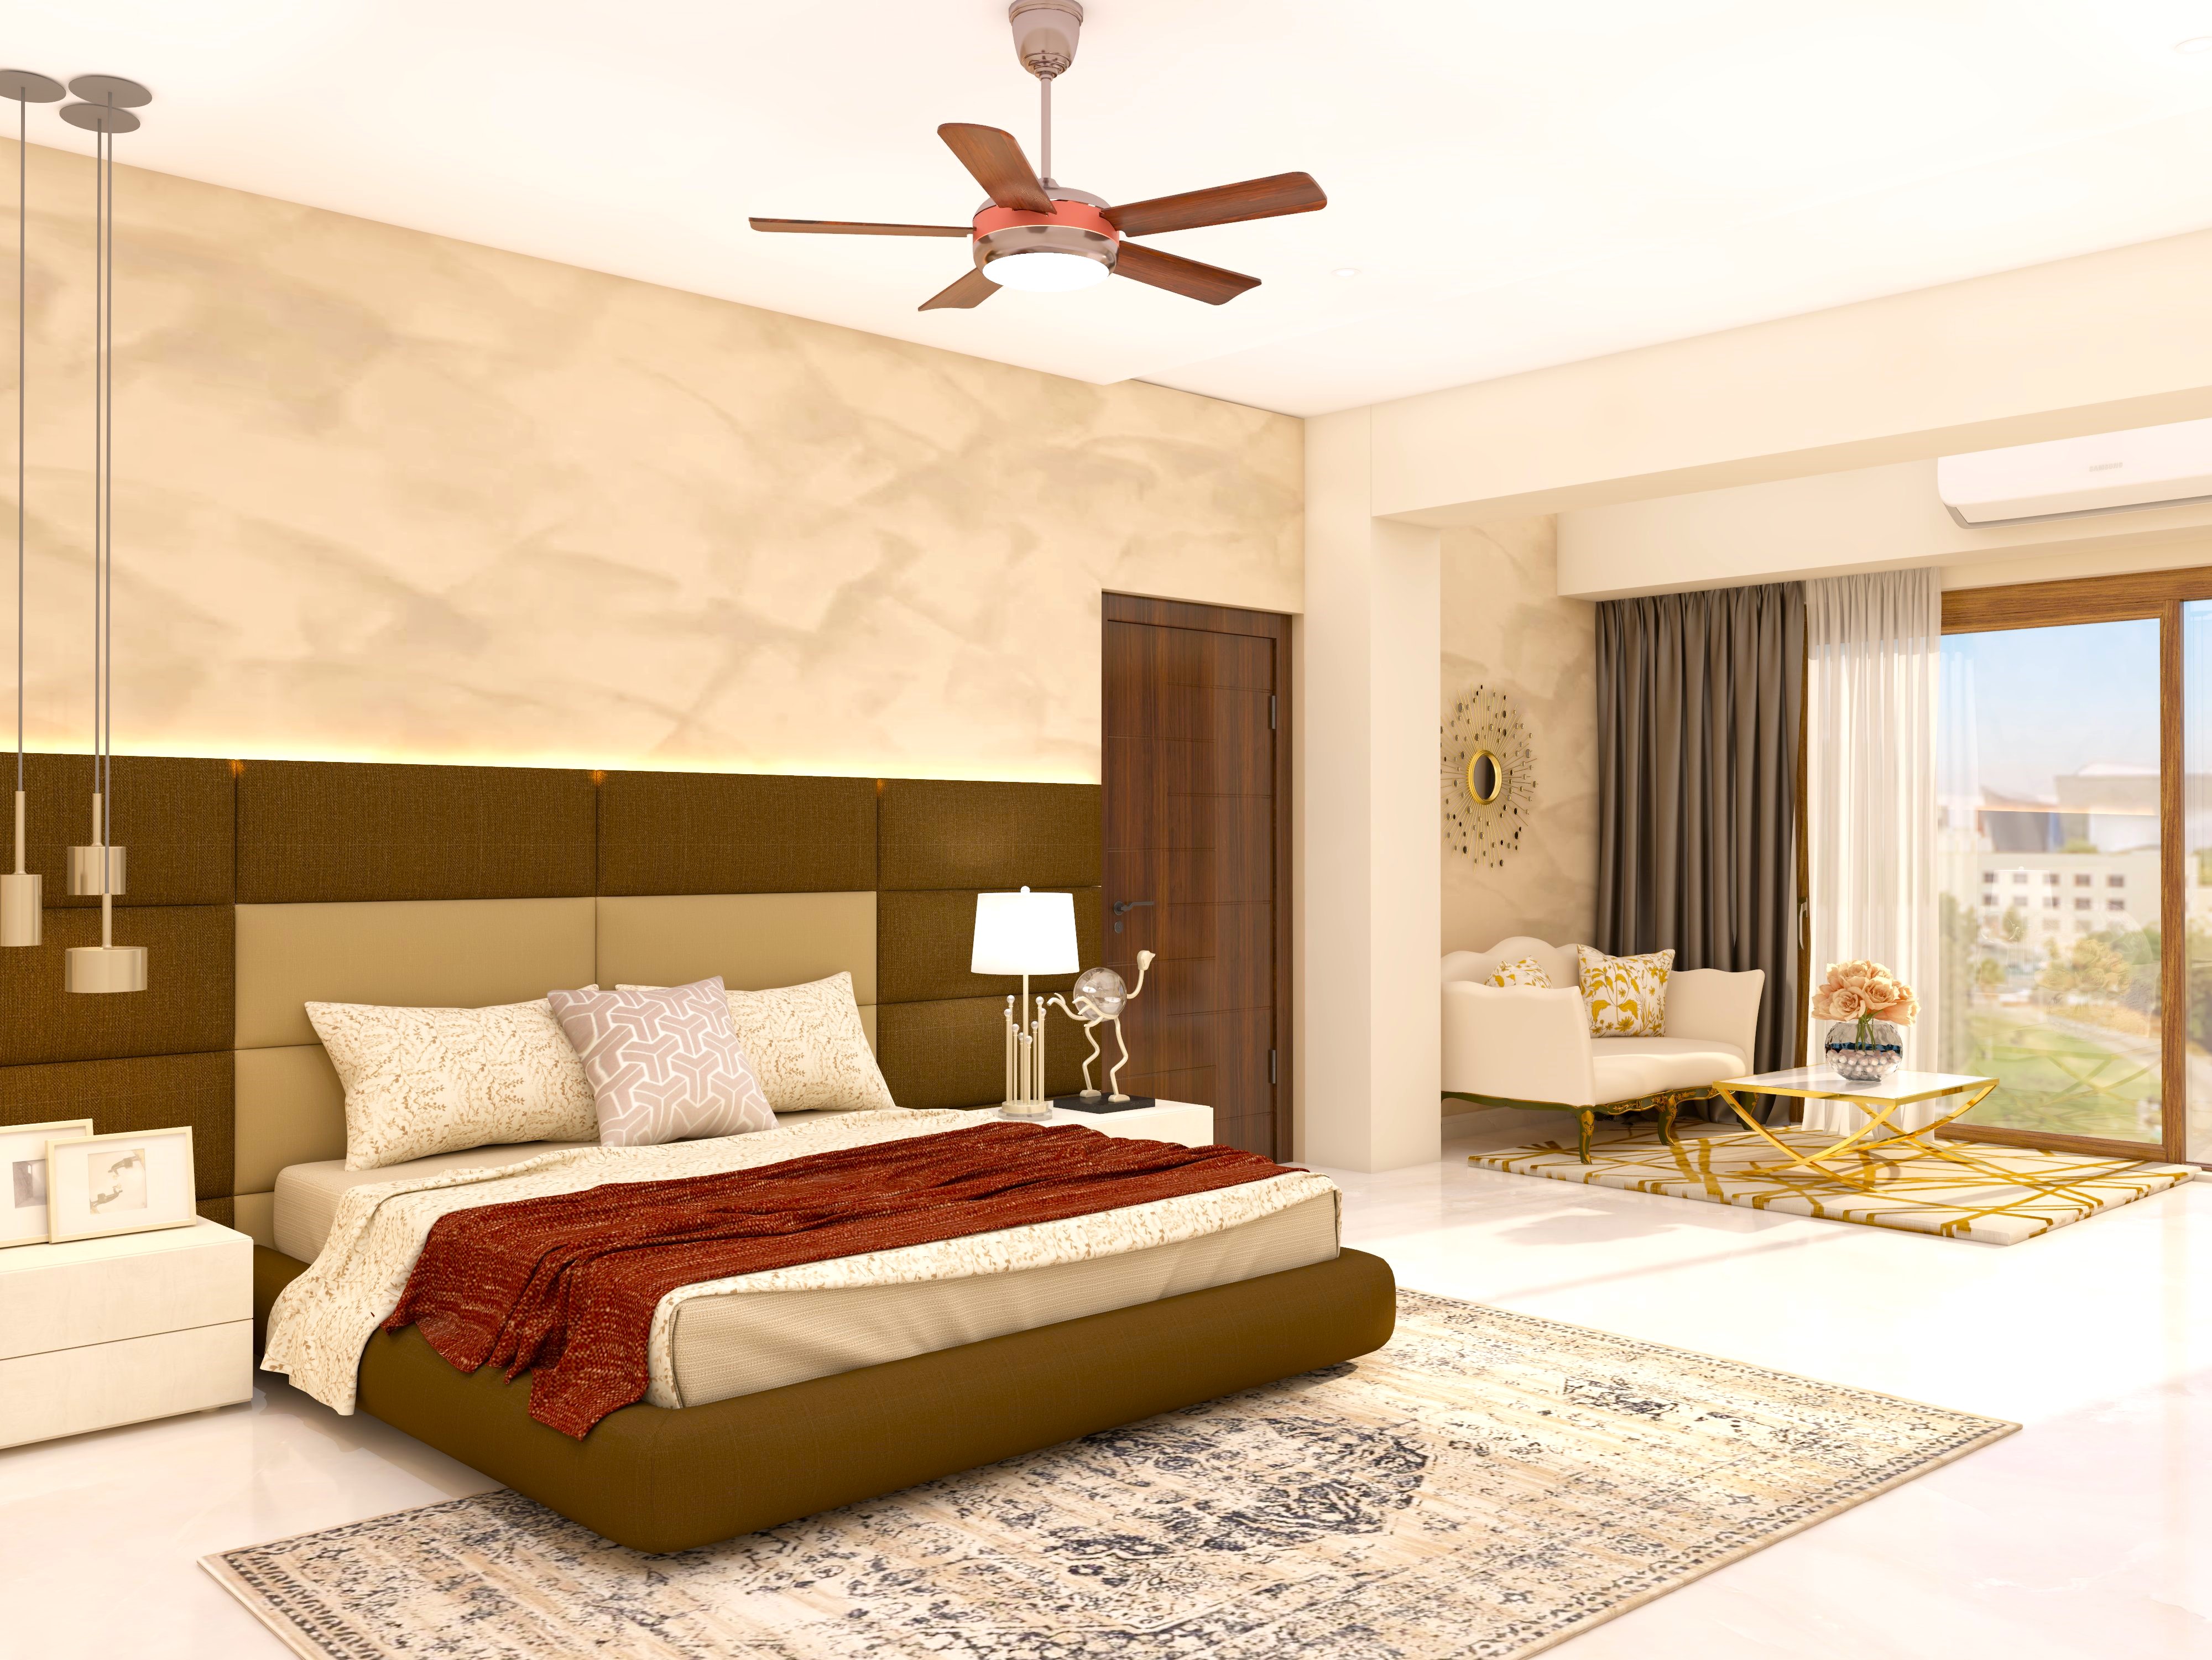 Simple bedroom with beige and brown upholstery headboard-Beautiful Homes